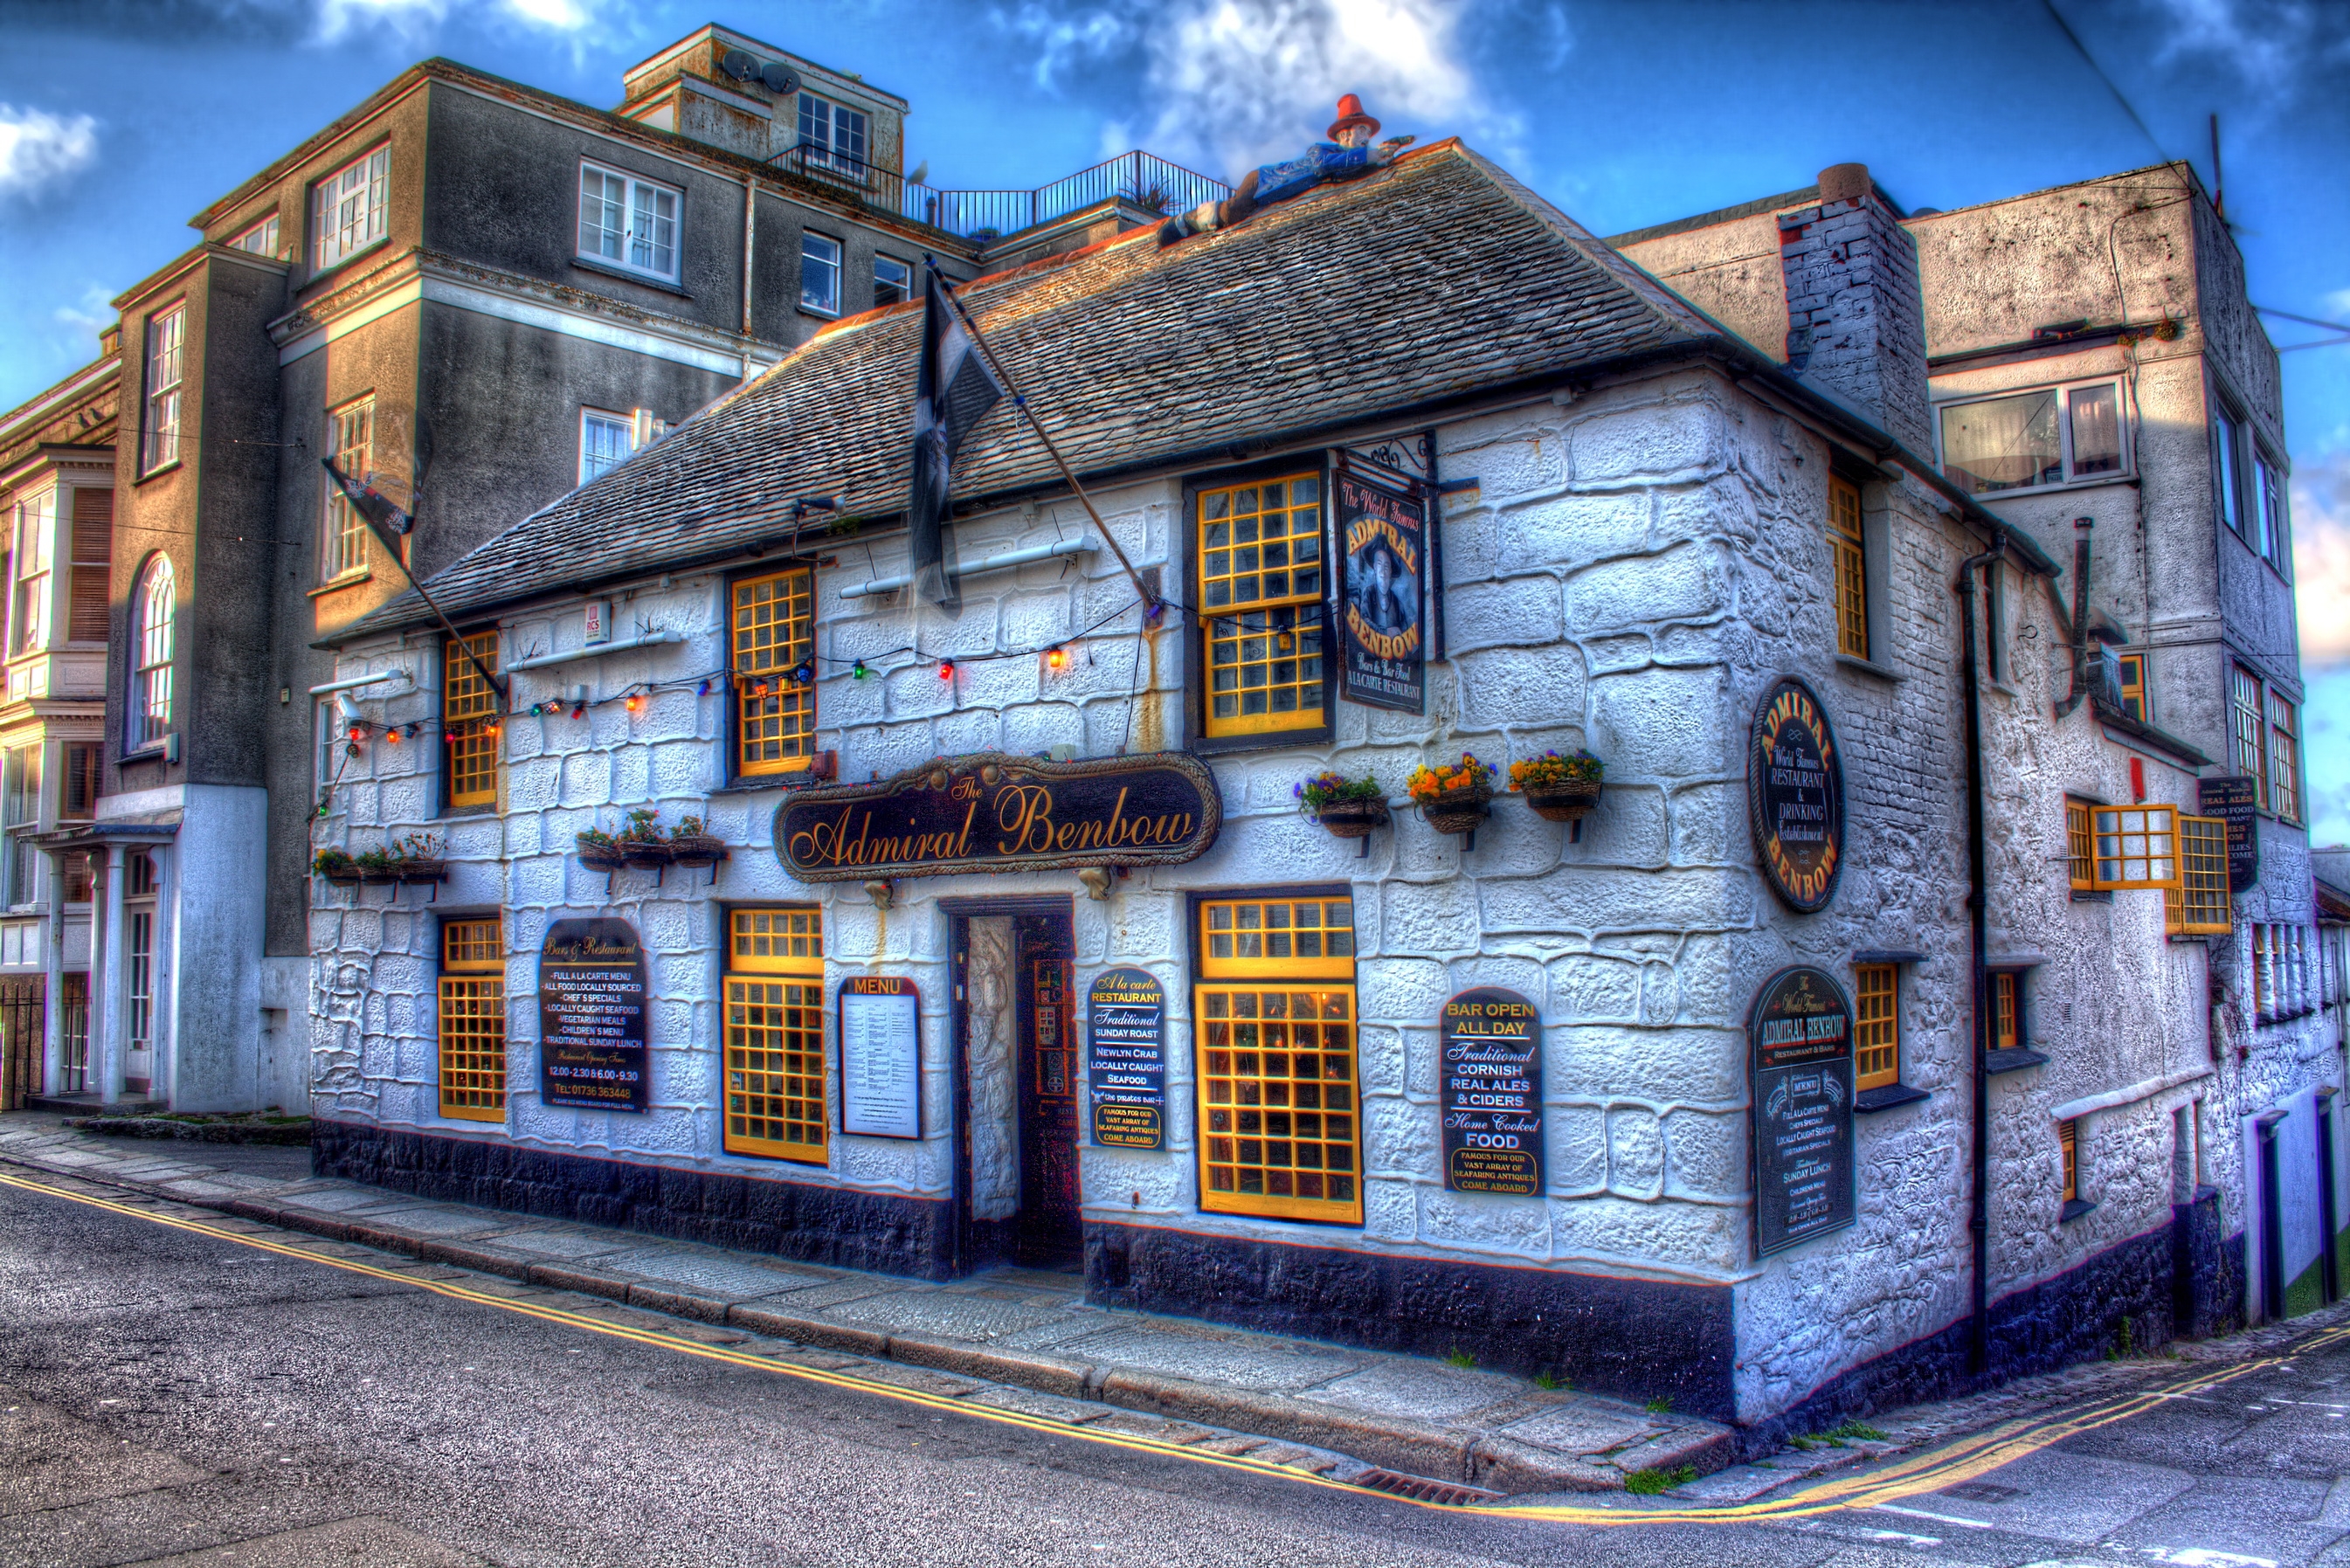 Cool Backgrounds great britain, hdr, england, admiral benbow United Kingdom